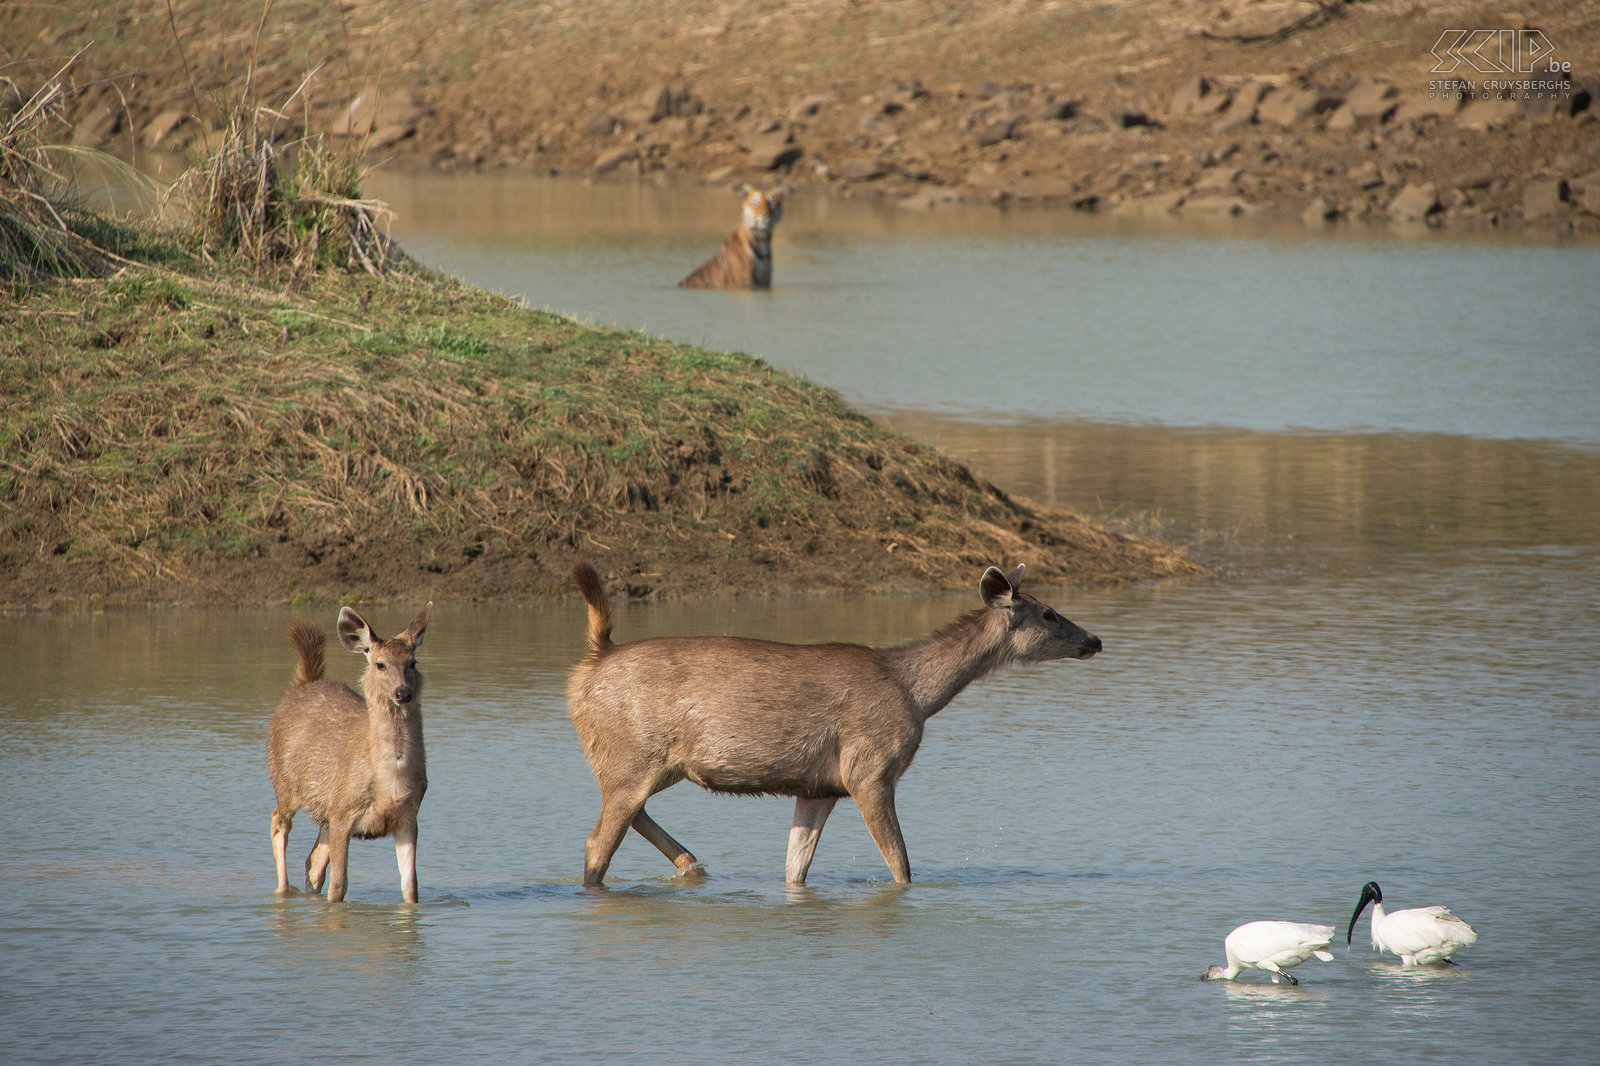 Tadoba - Sambar deers and tigress After about 20 minutes two deer came back into the water while they were fully aware that the tigress was still cooling down in the waterhole. The deers made alarm calls and were even challenging the tigress. Stefan Cruysberghs